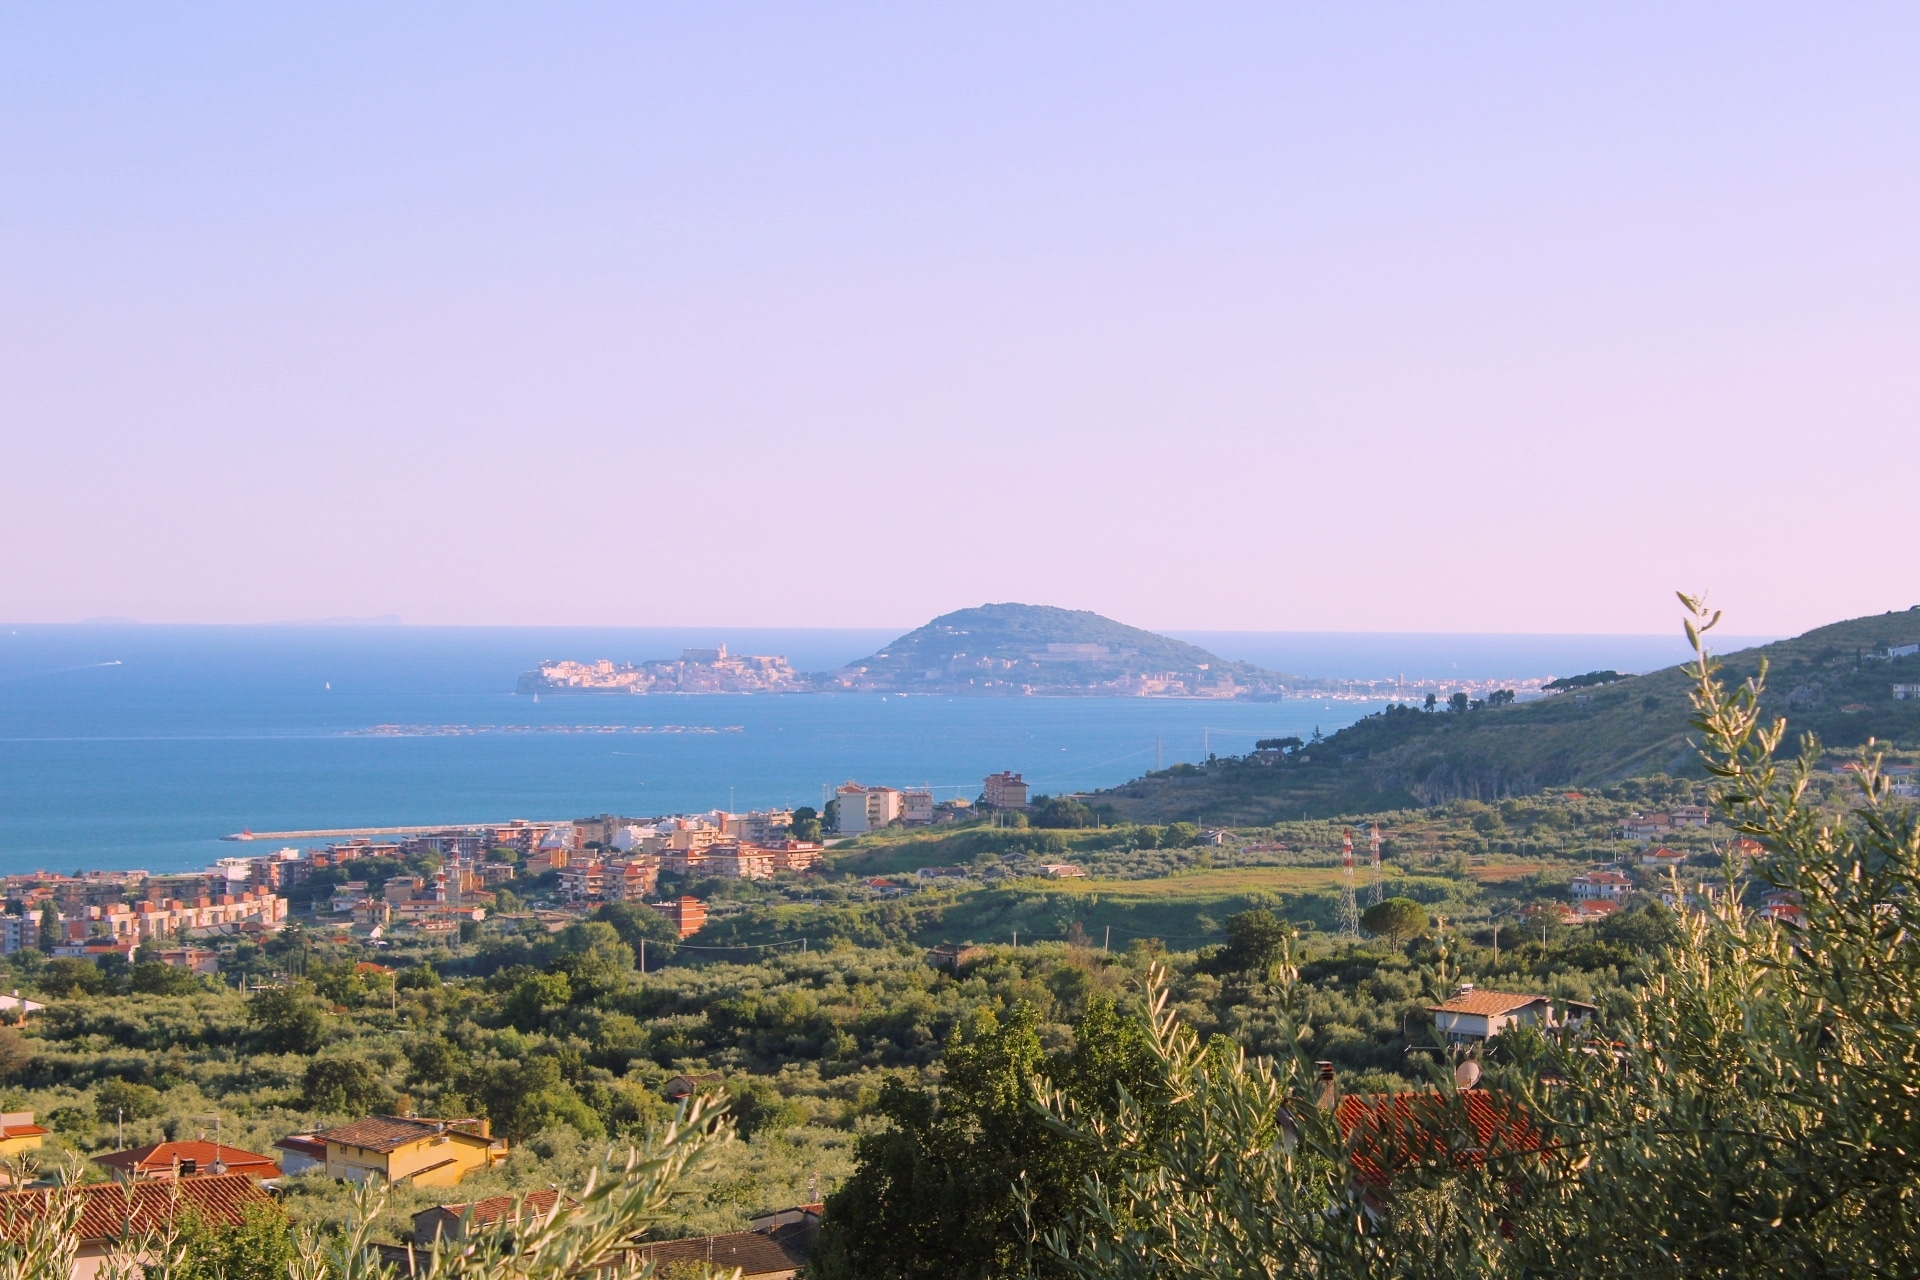 View of Gaeta from Formia